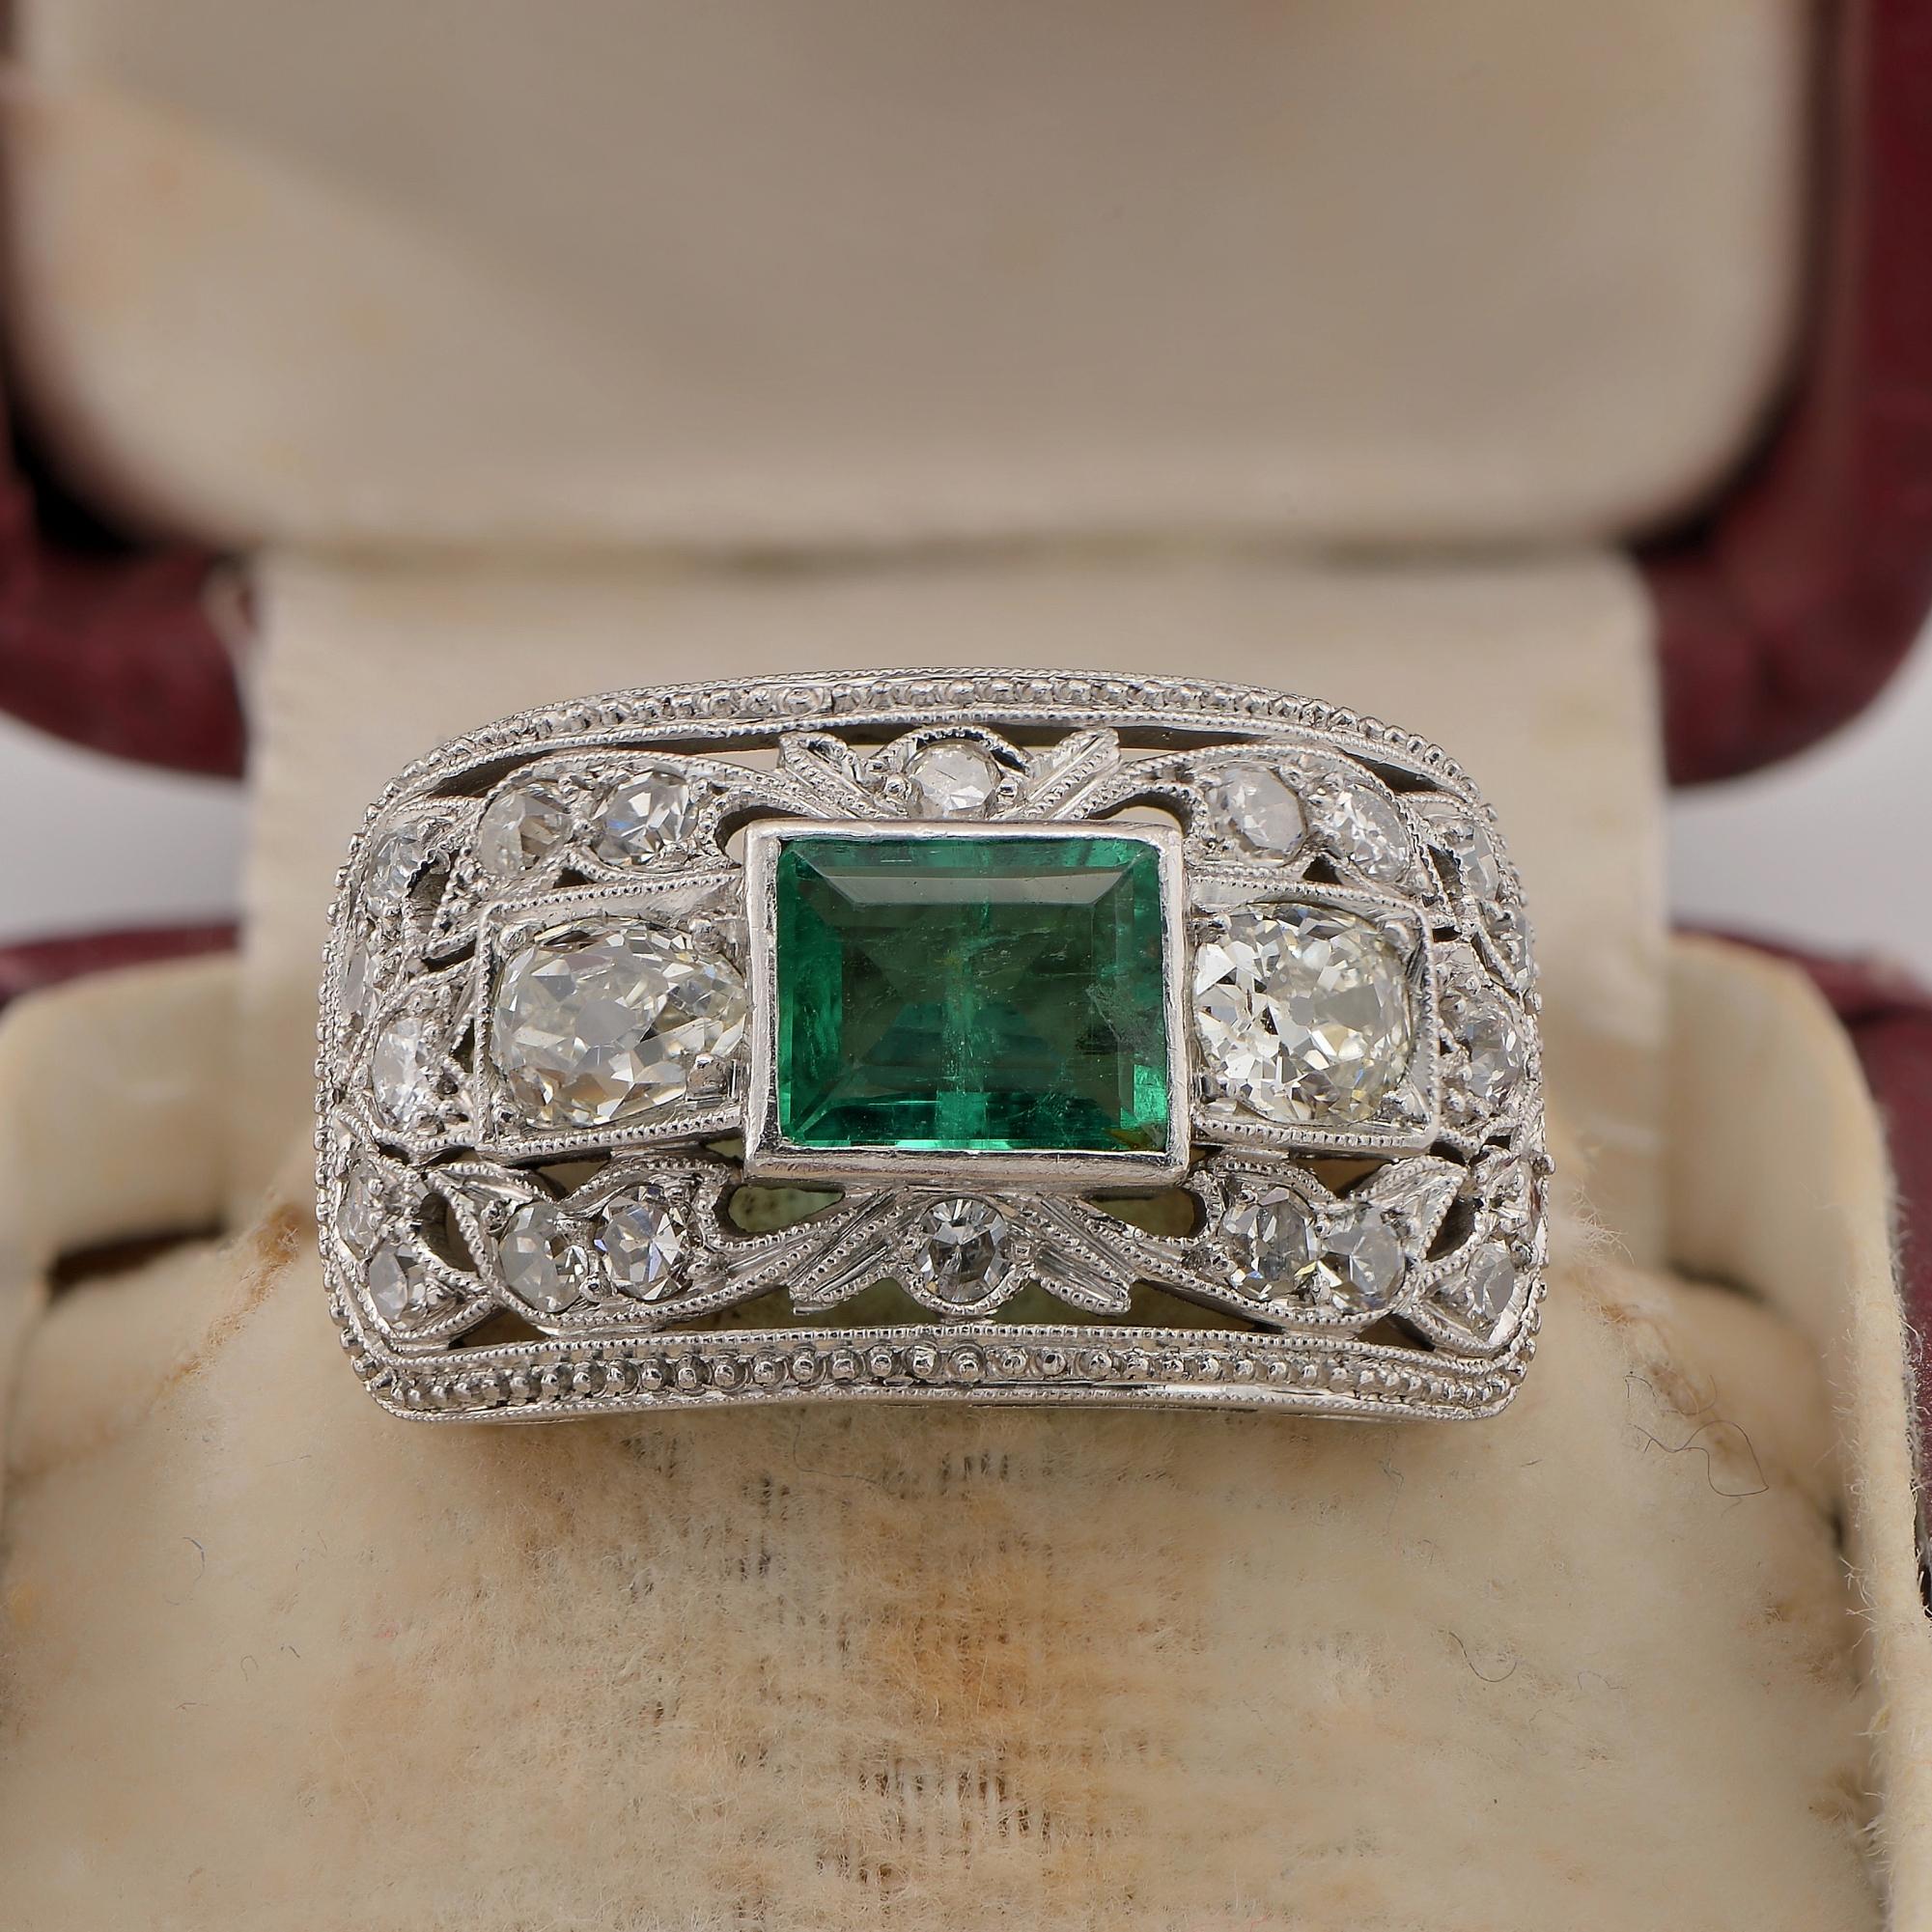 Art Deco Elegance
This original and quite unique Art Deco ring is dated 1920 ca
Hand crafted of solid Platinum in a tasteful horizontal panel with beautiful openwork scroll design mill-point detailed throughout, highlighted by old cut Diamonds with